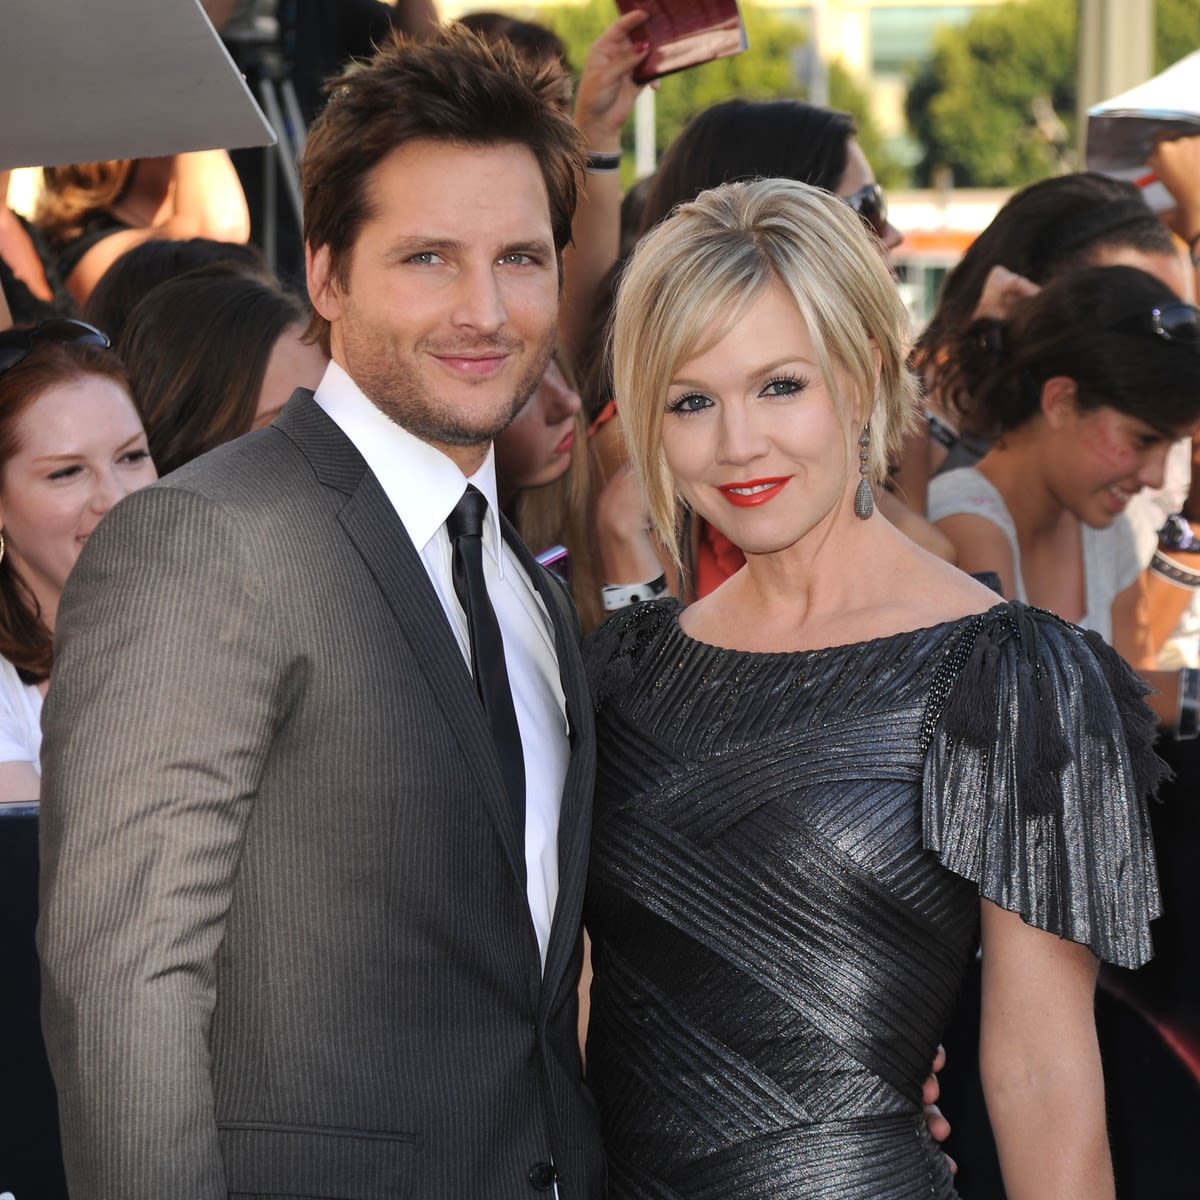 Why Jennie Garth, Peter Facinelli's Divorce Strengthened Their Family